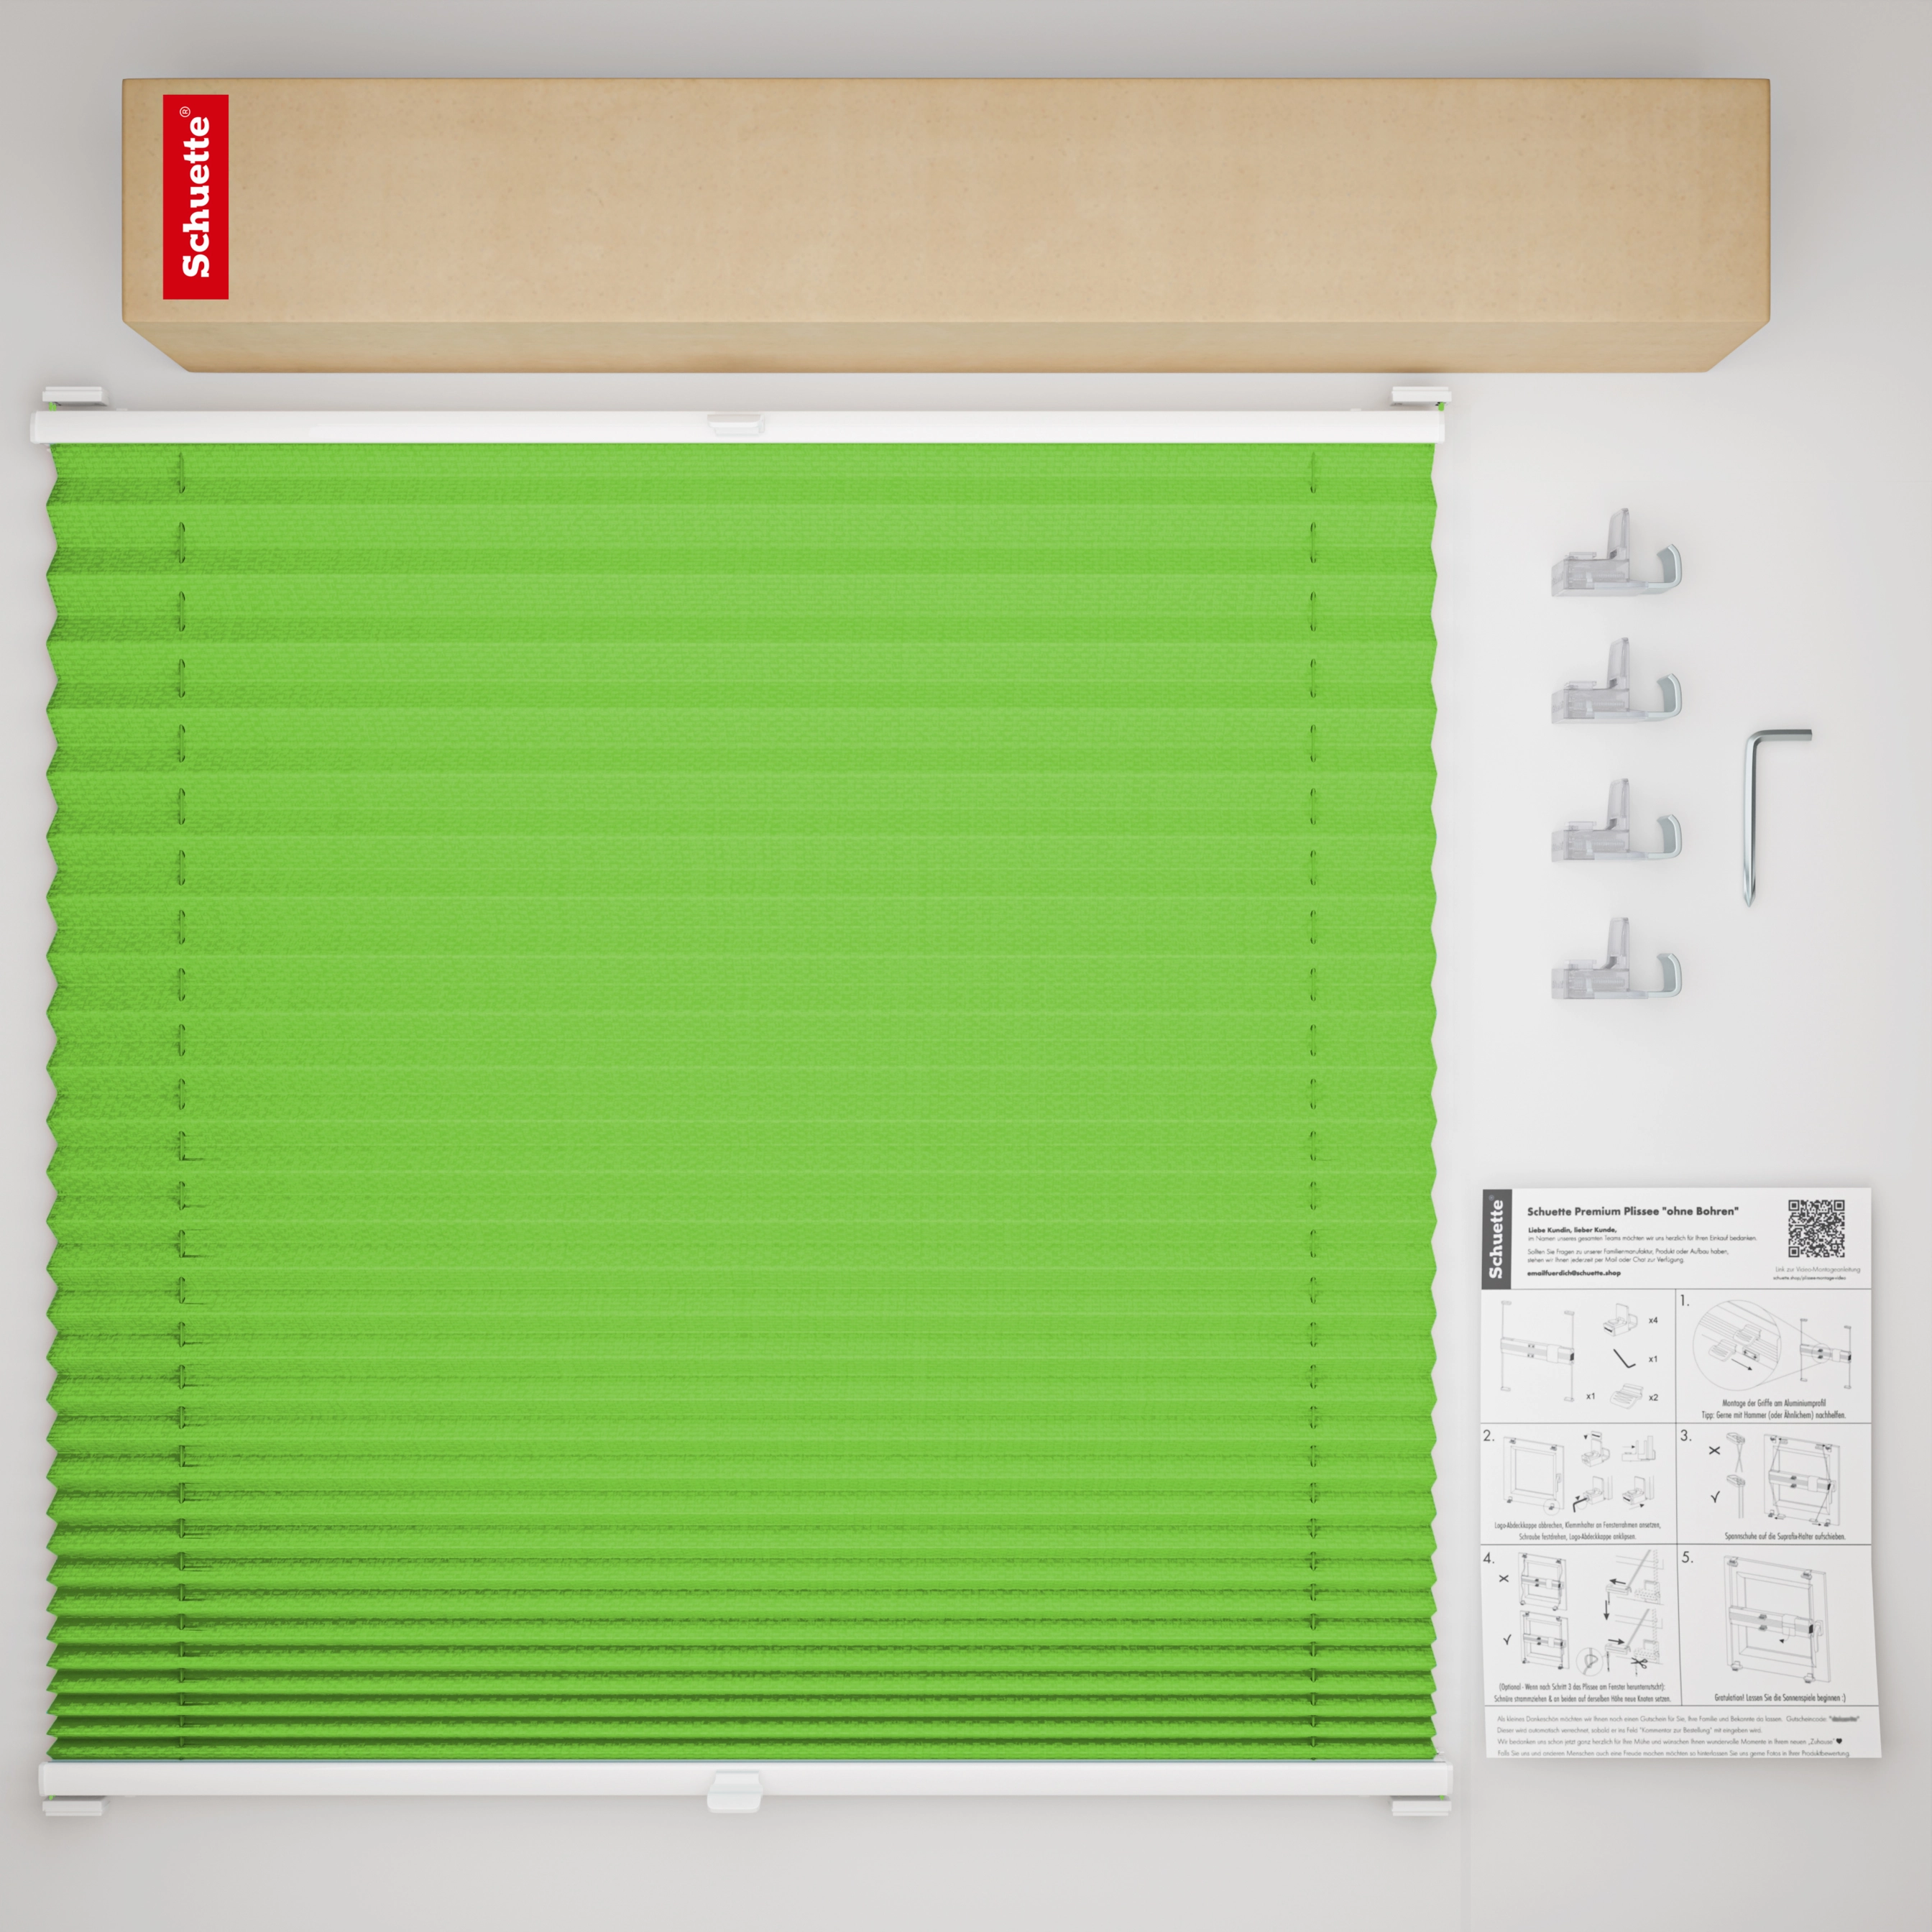 Schuette® Pleated Blind Made to Measure without Drilling • Premium Collection: Green Meadow (Green) • Profile Color: White